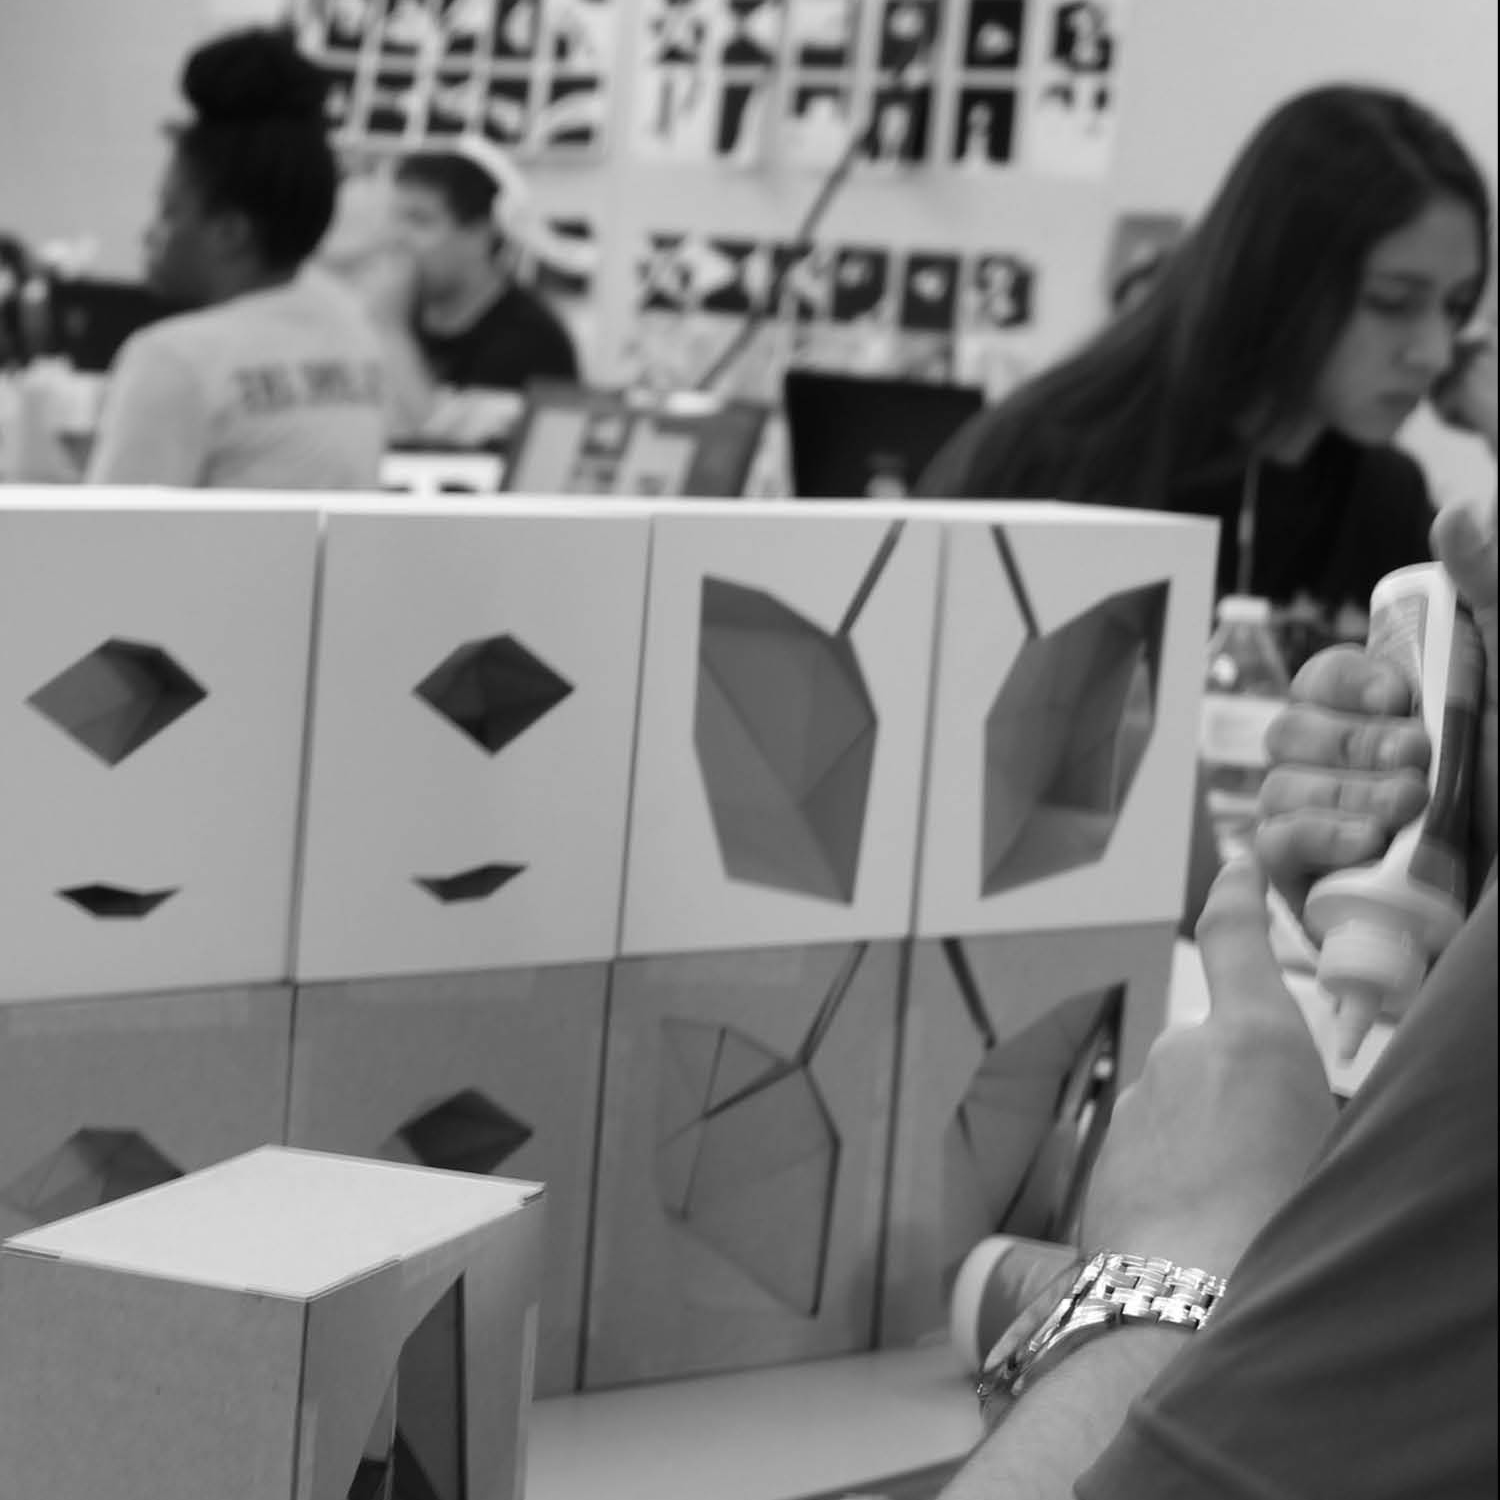 Student applying glue to a paper model, with other students working on projects in the background.